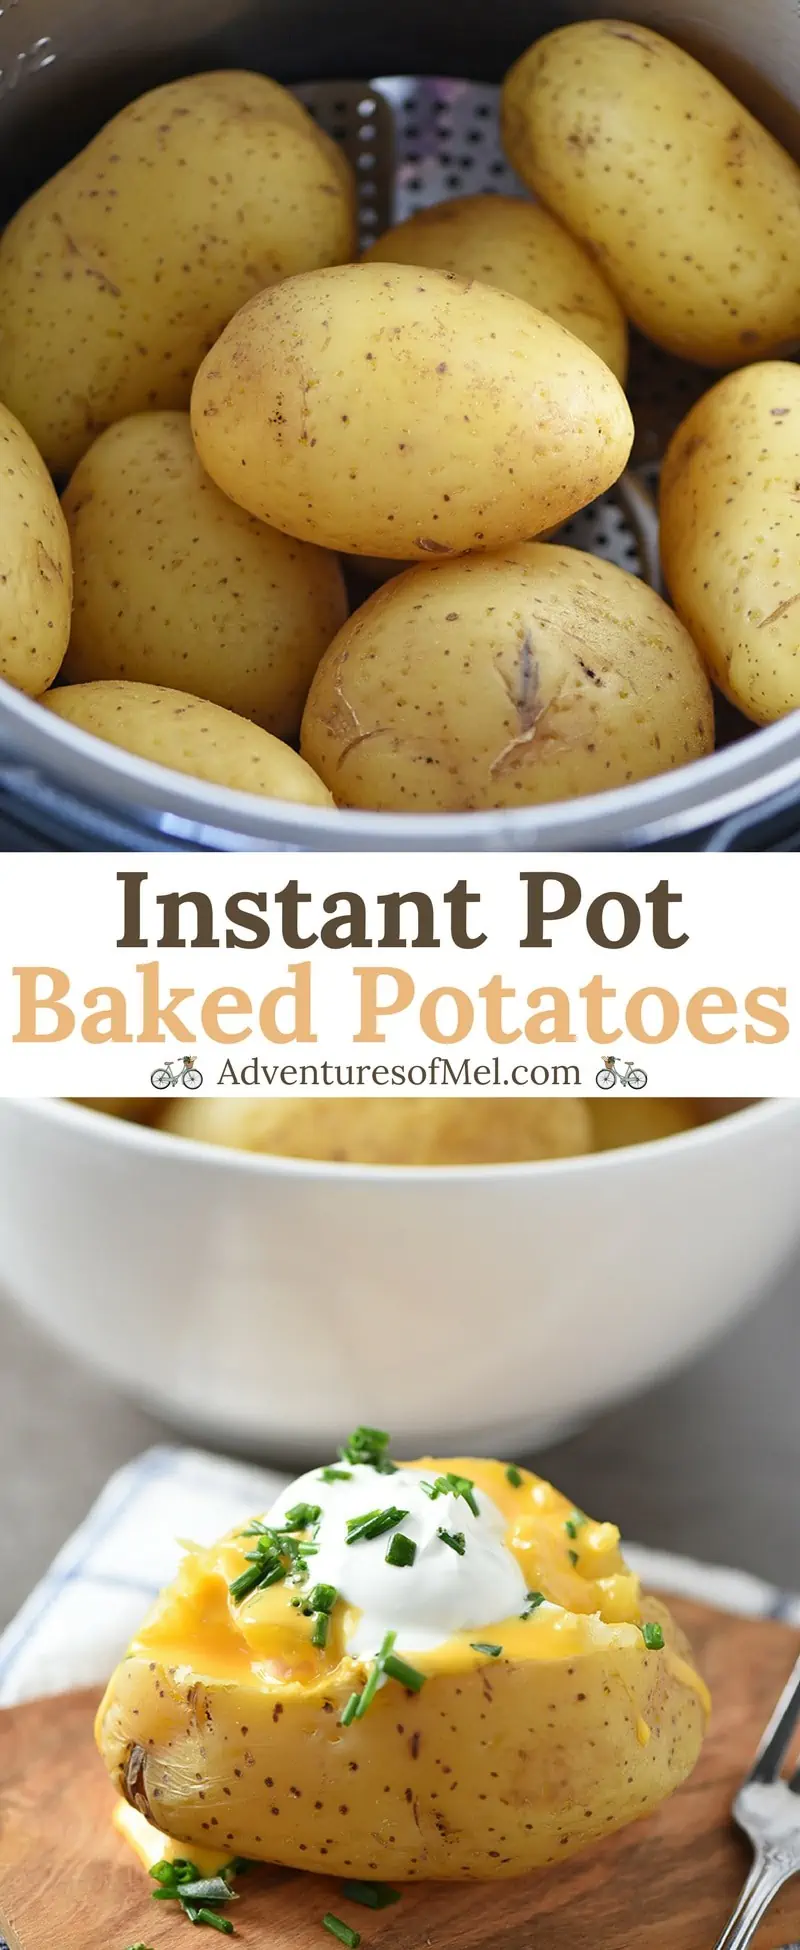 Instant Pot Baked Potatoes are so easy to make, pressure cooked in less than 10 minutes. Tender and delicious, they're a family favorite dinner side.